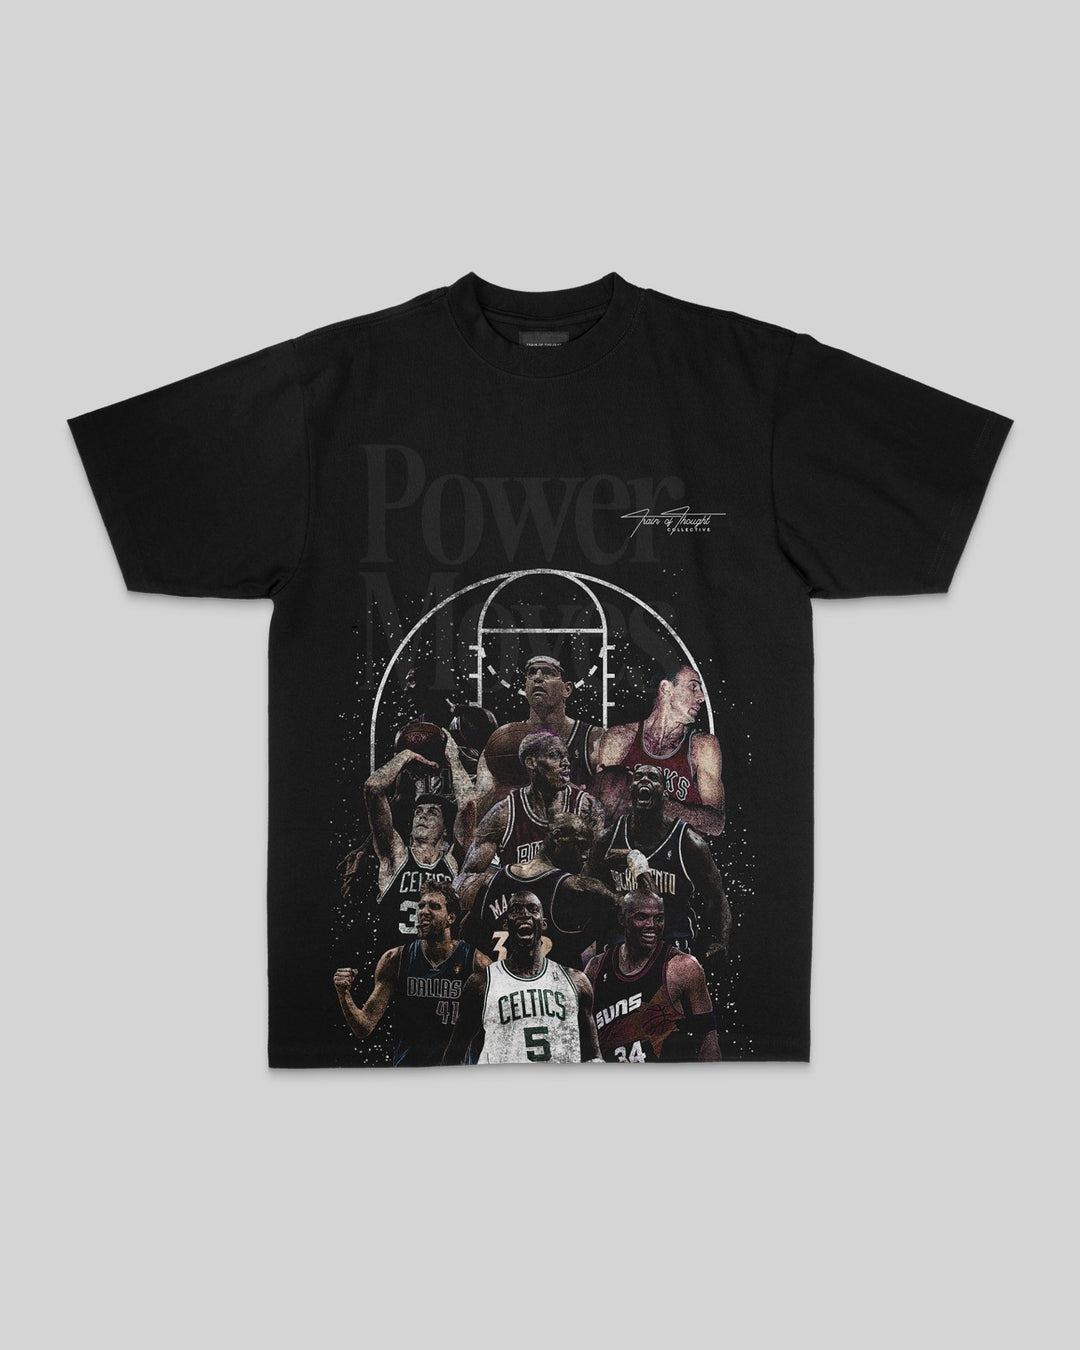 Power Moves Tee - trainofthoughtcollective